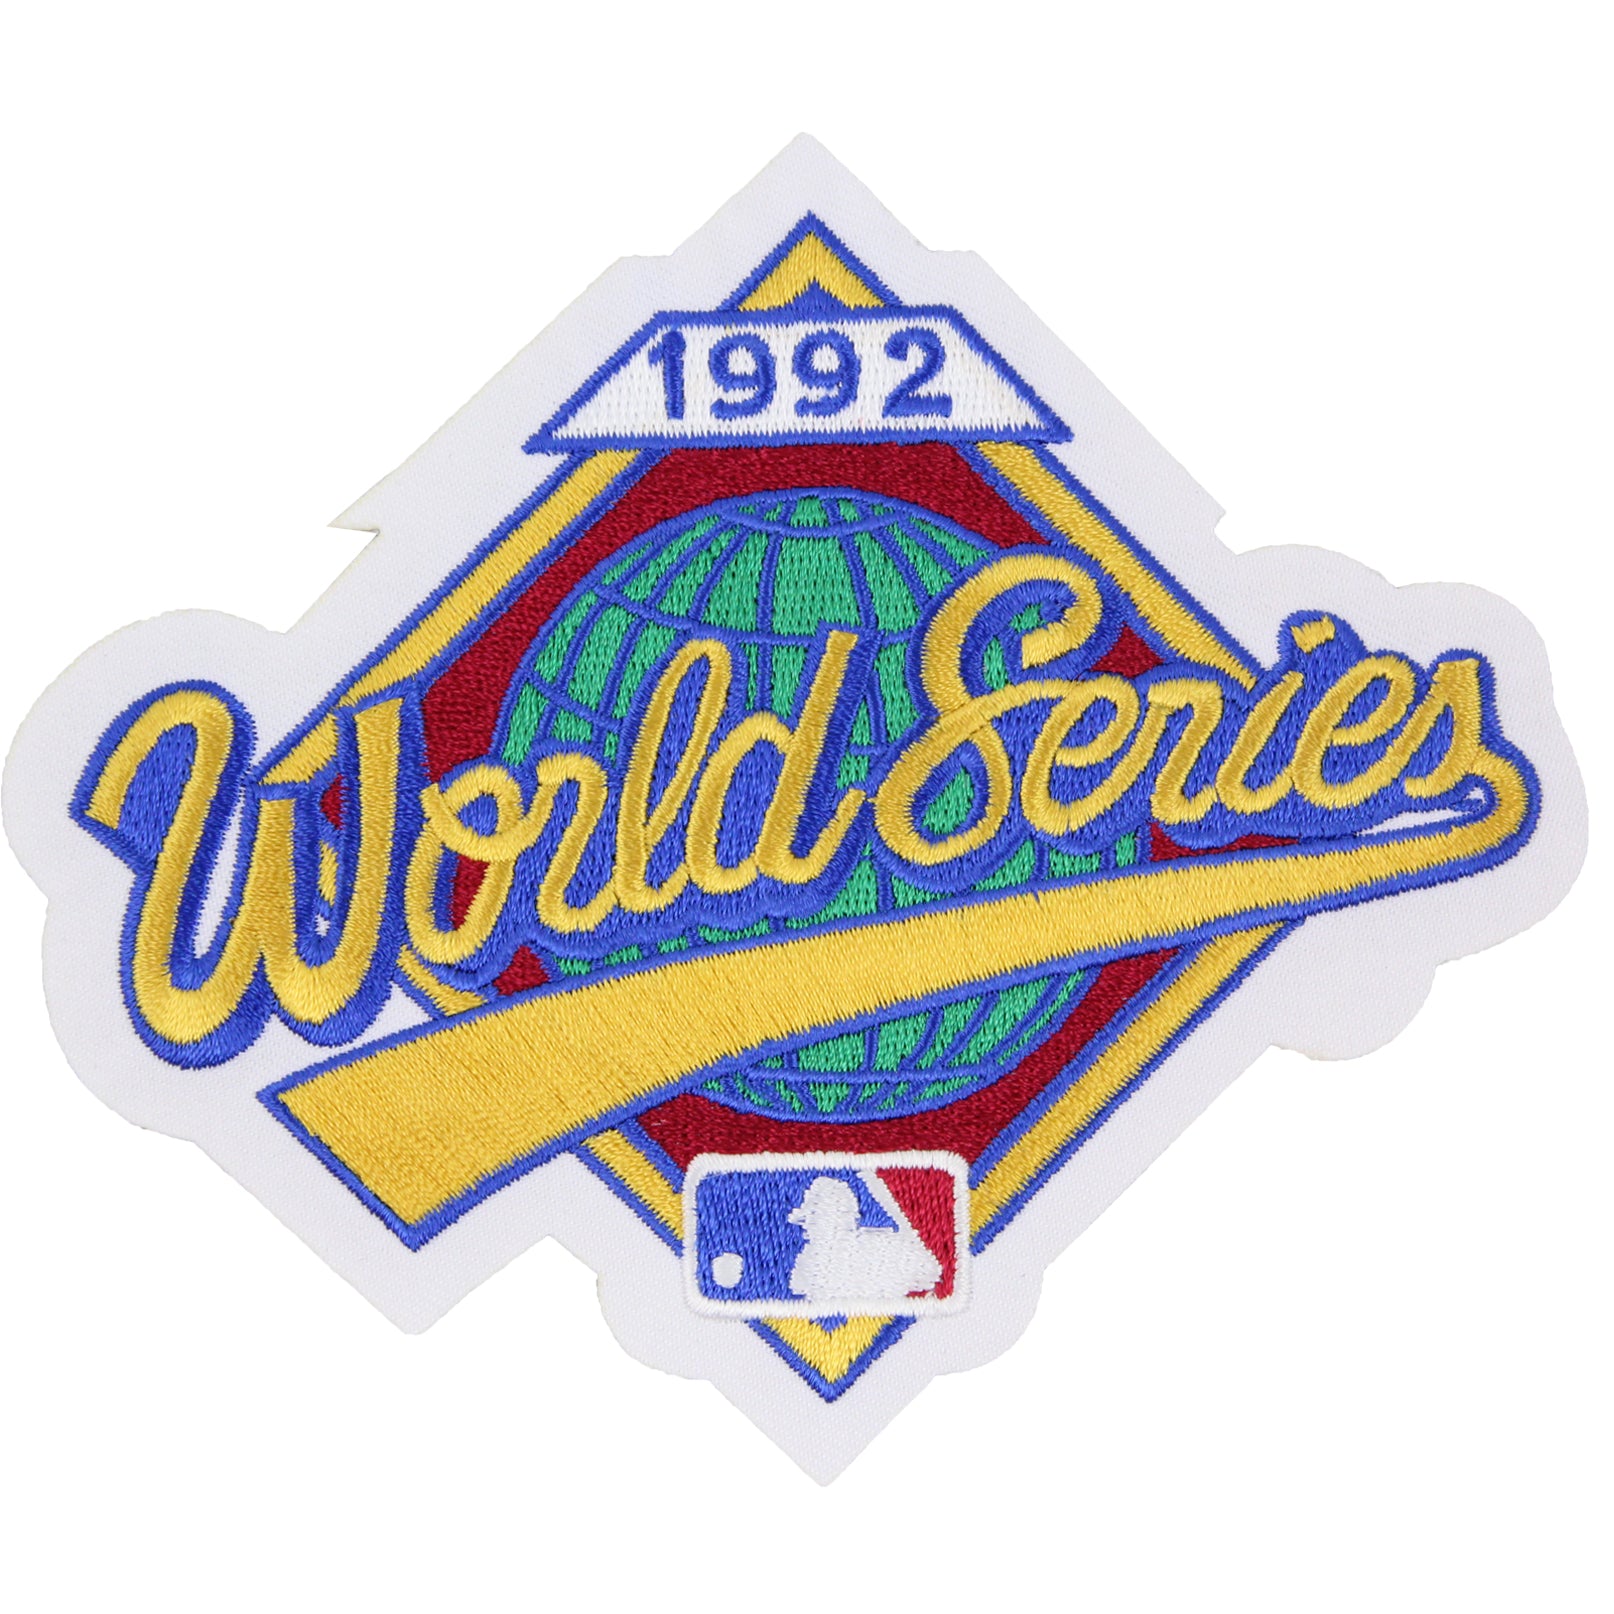 MLB 2023 World Series Collectors Patch by The Emblem Source